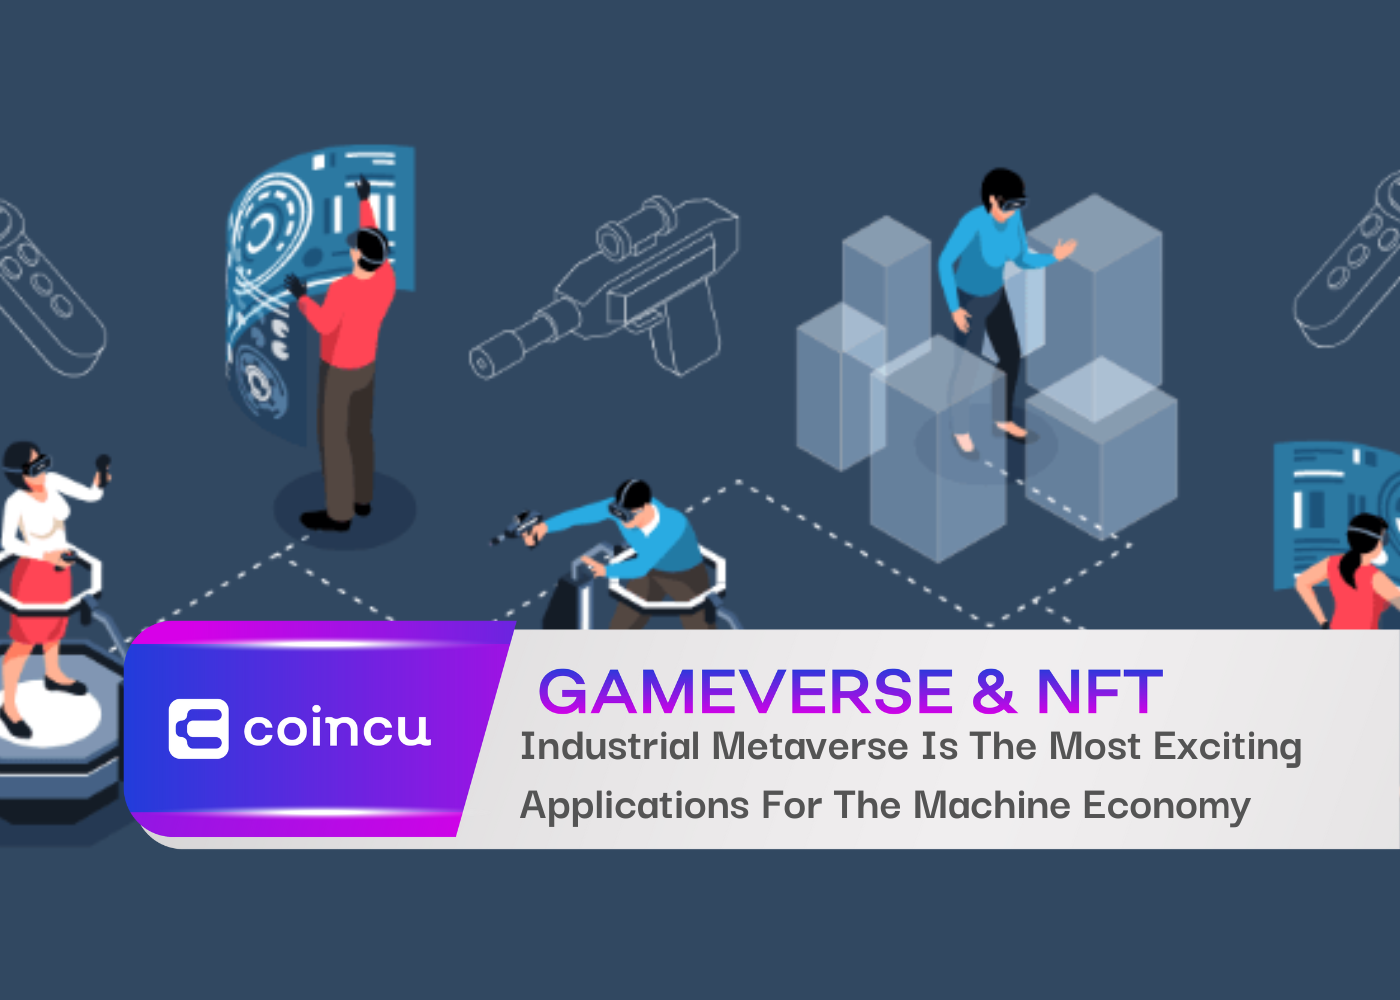 Industrial Metaverse Is One Of The Most Exciting